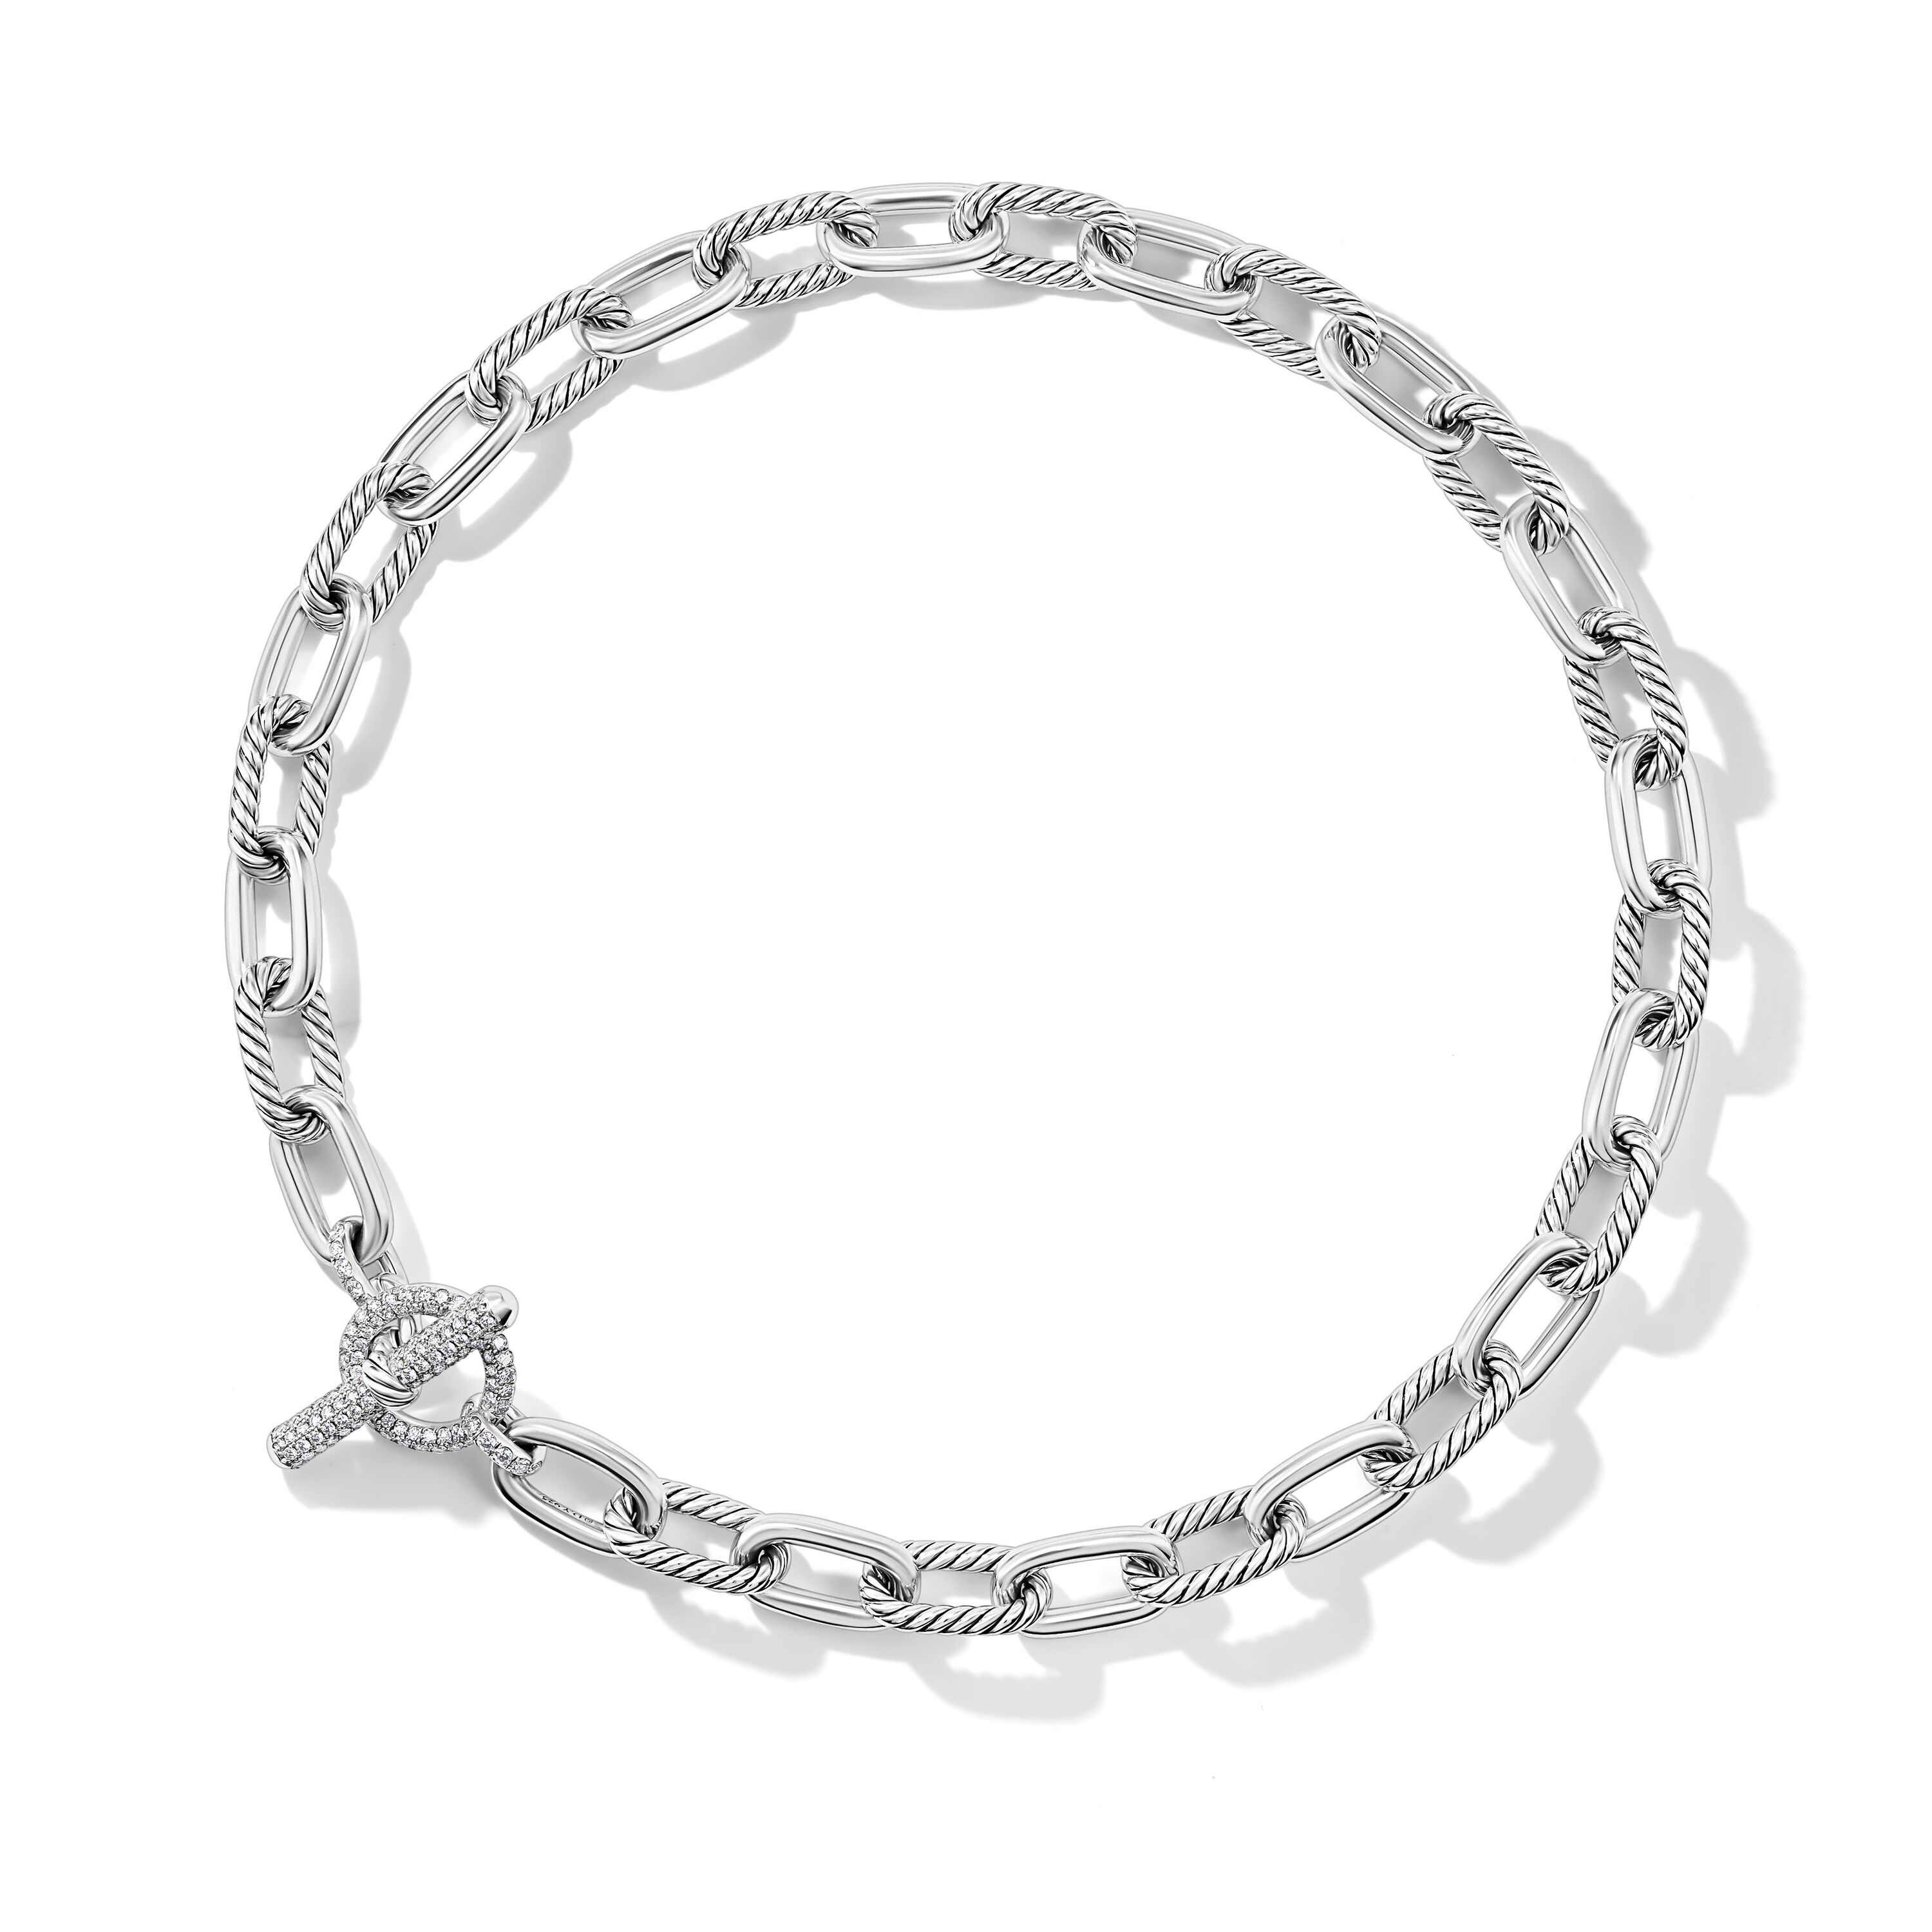 DY Madison® Toggle Chain Necklace in Sterling Silver with Diamonds 11mm